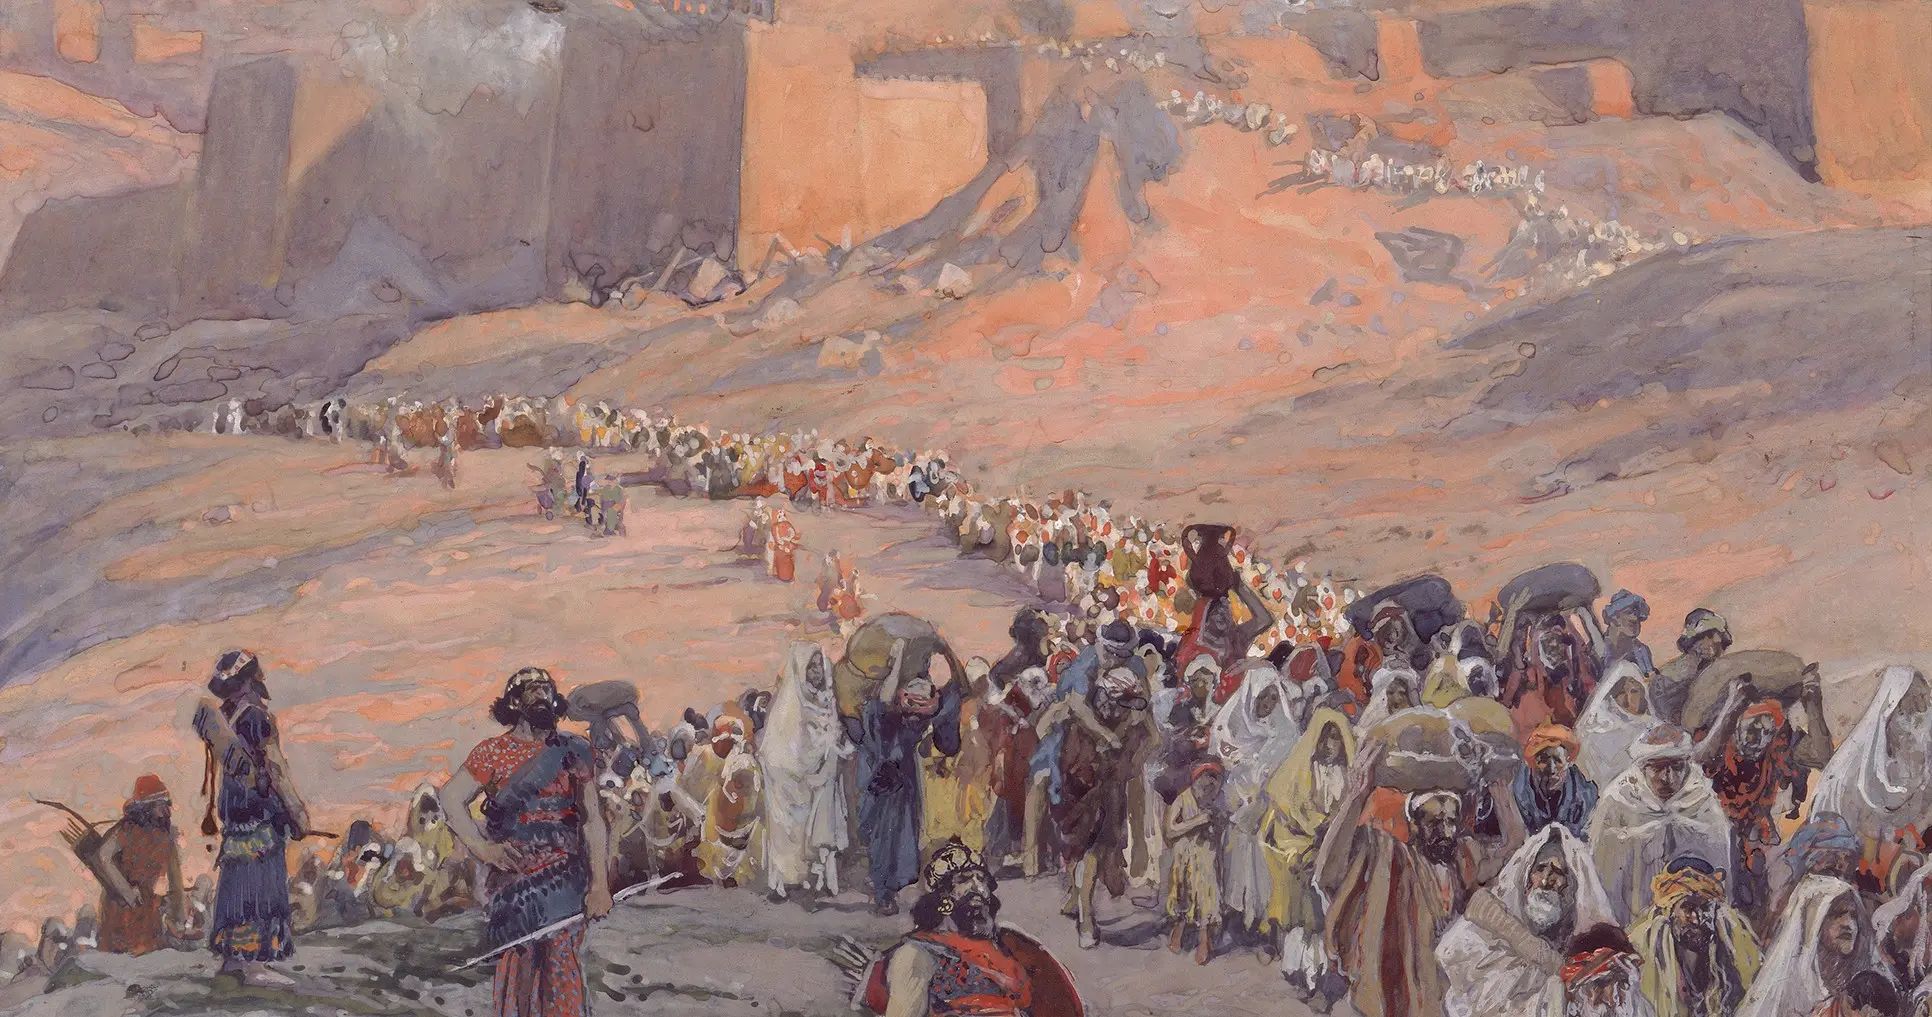 The Flight of the Prisoners, by James Tissot and others. Image via Church of Jesus Christ.